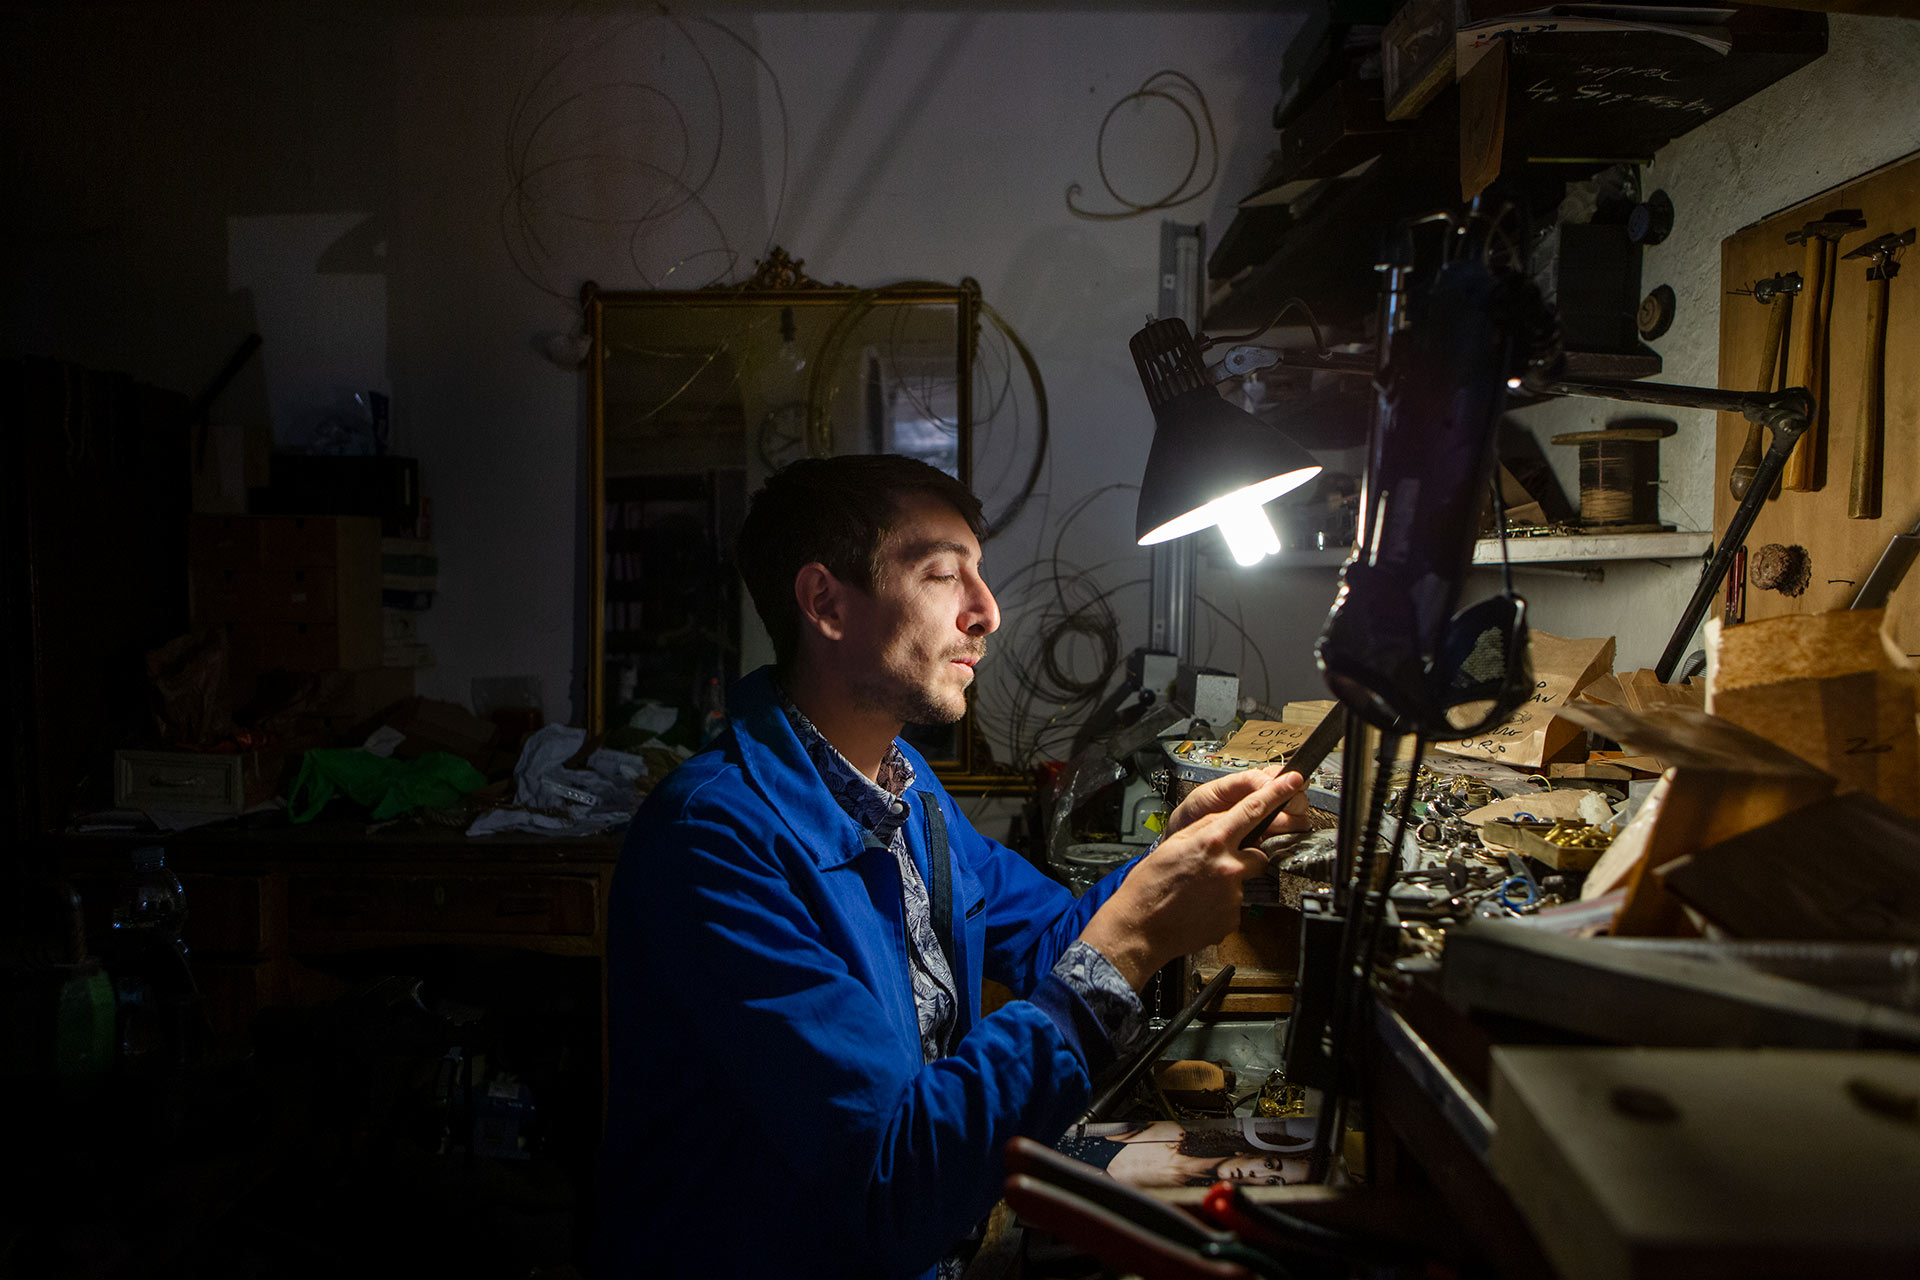 Man in a blue overall coat sits in a dark workshop under a lamp making jewellery